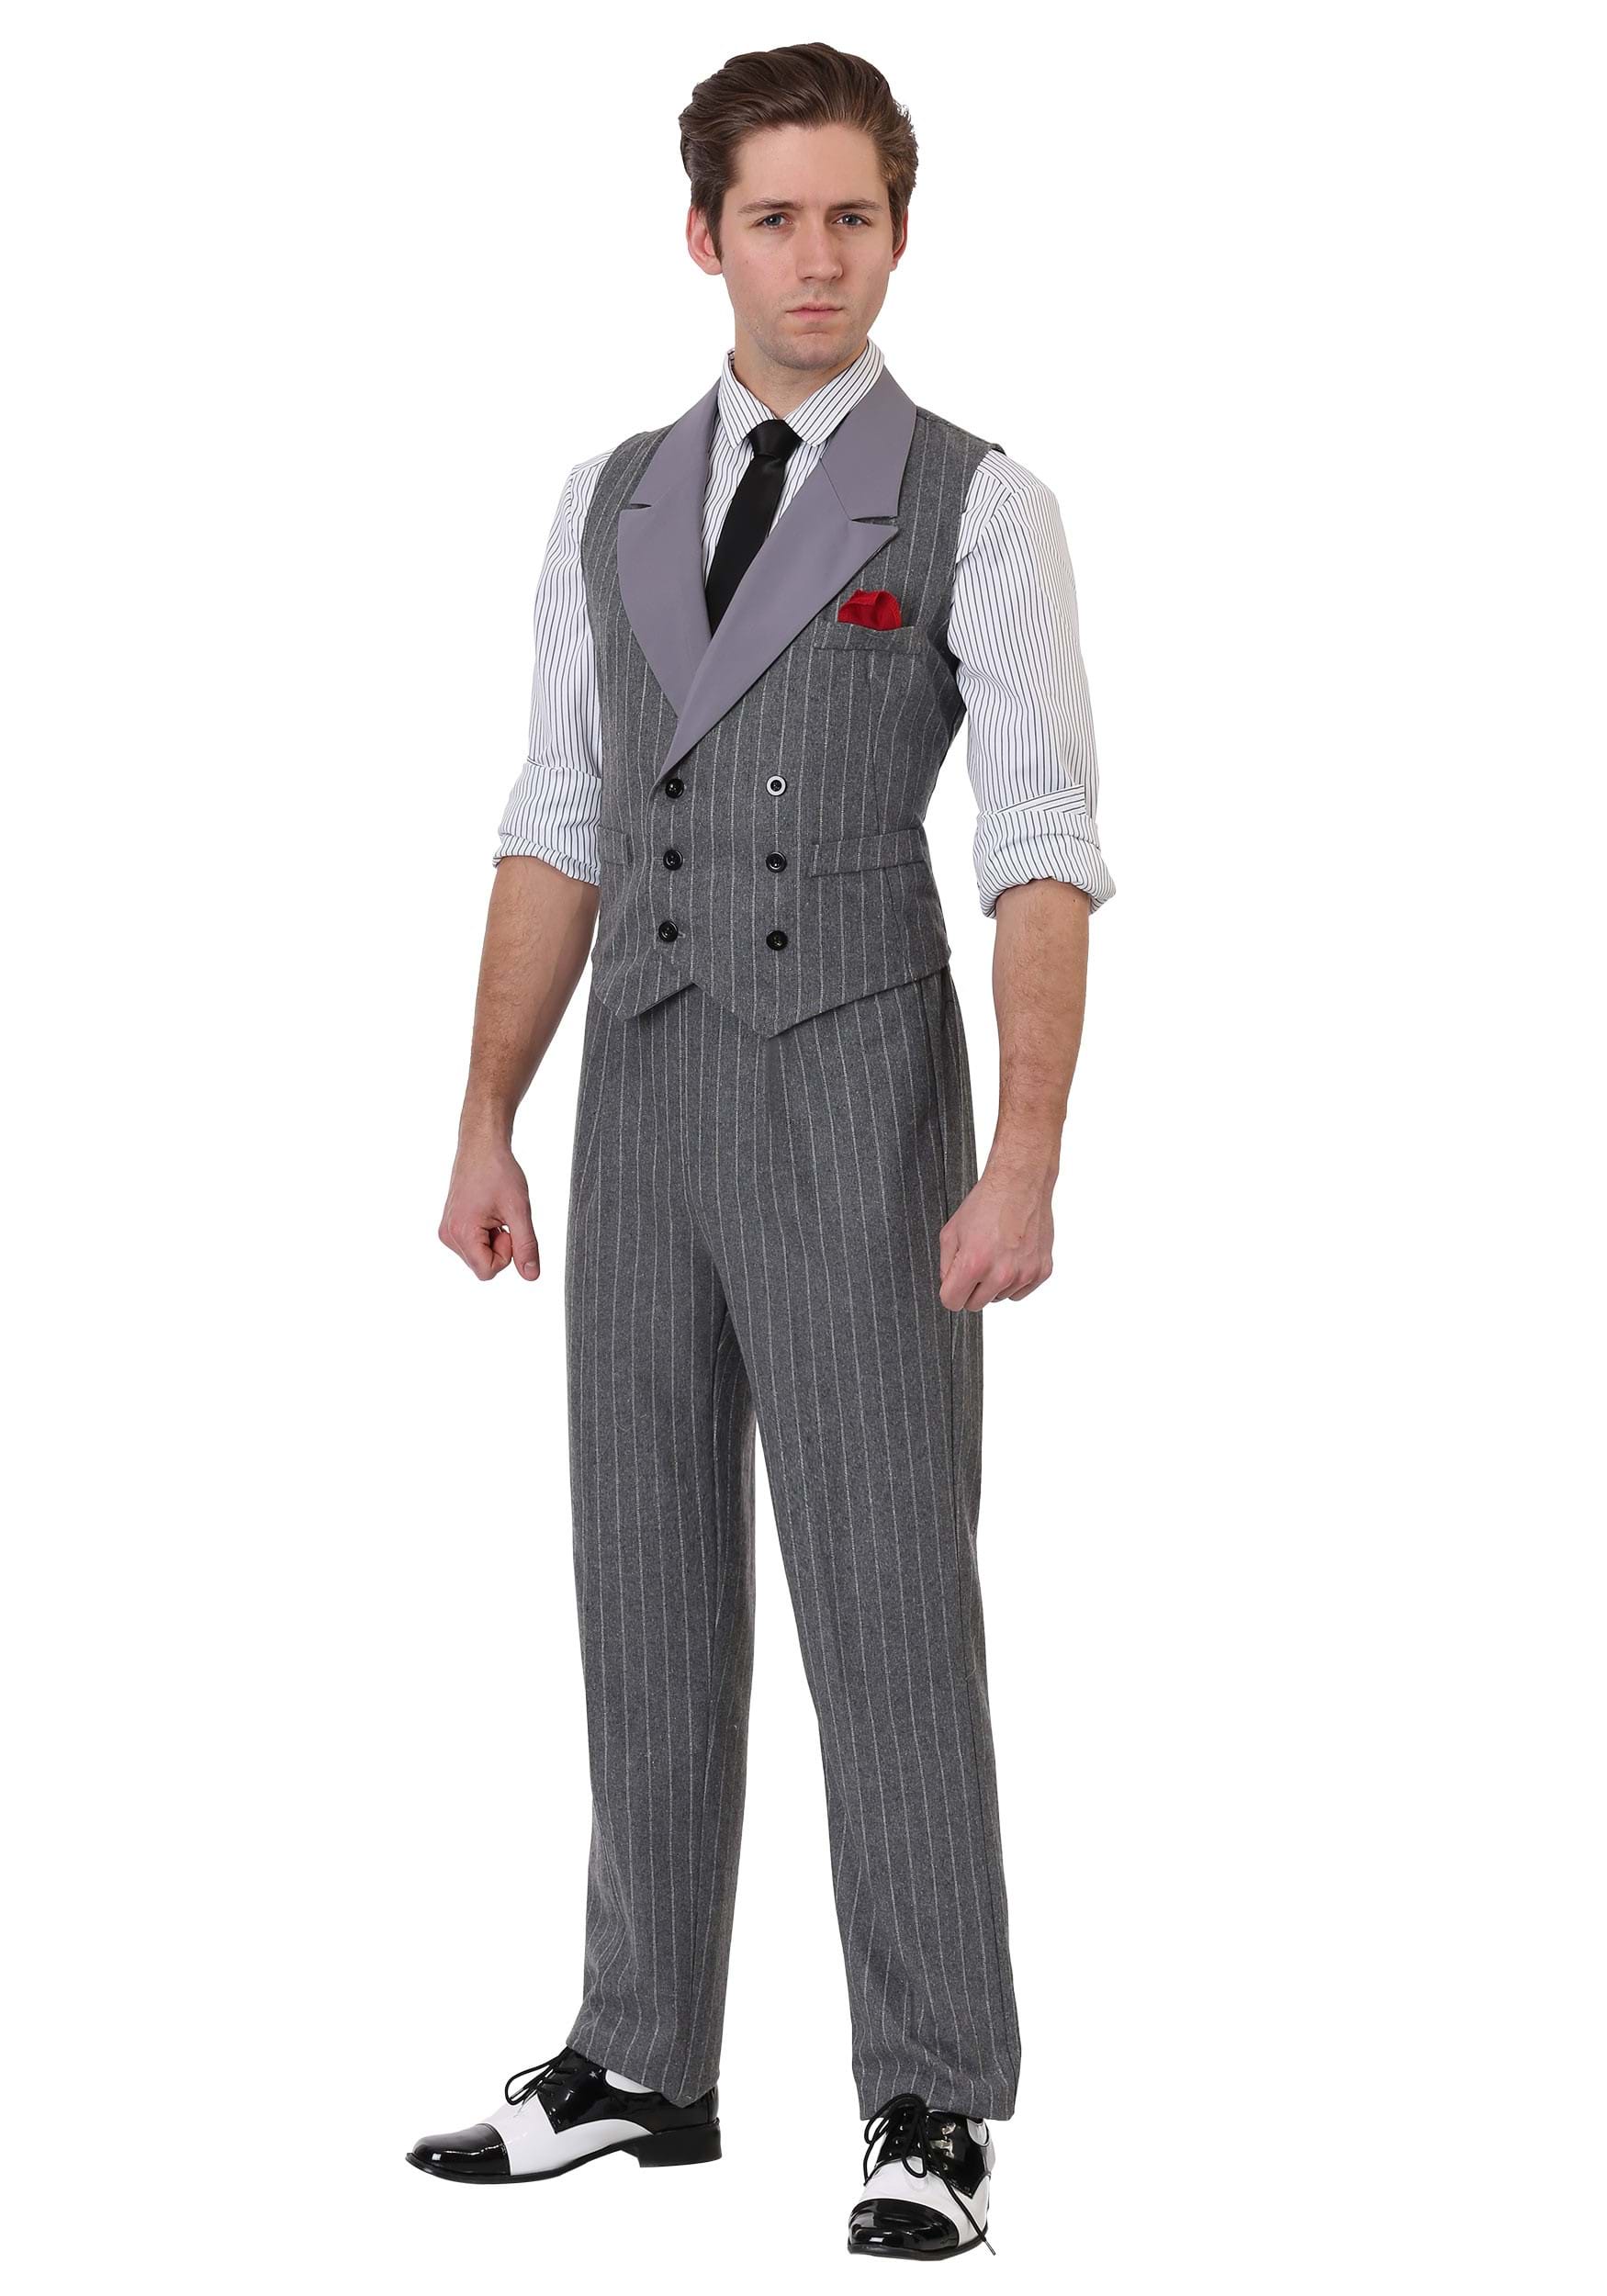 Photos - Fancy Dress FUN Costumes Men's Ruthless Gangster Costume | Adult Decade Costumes Gray&